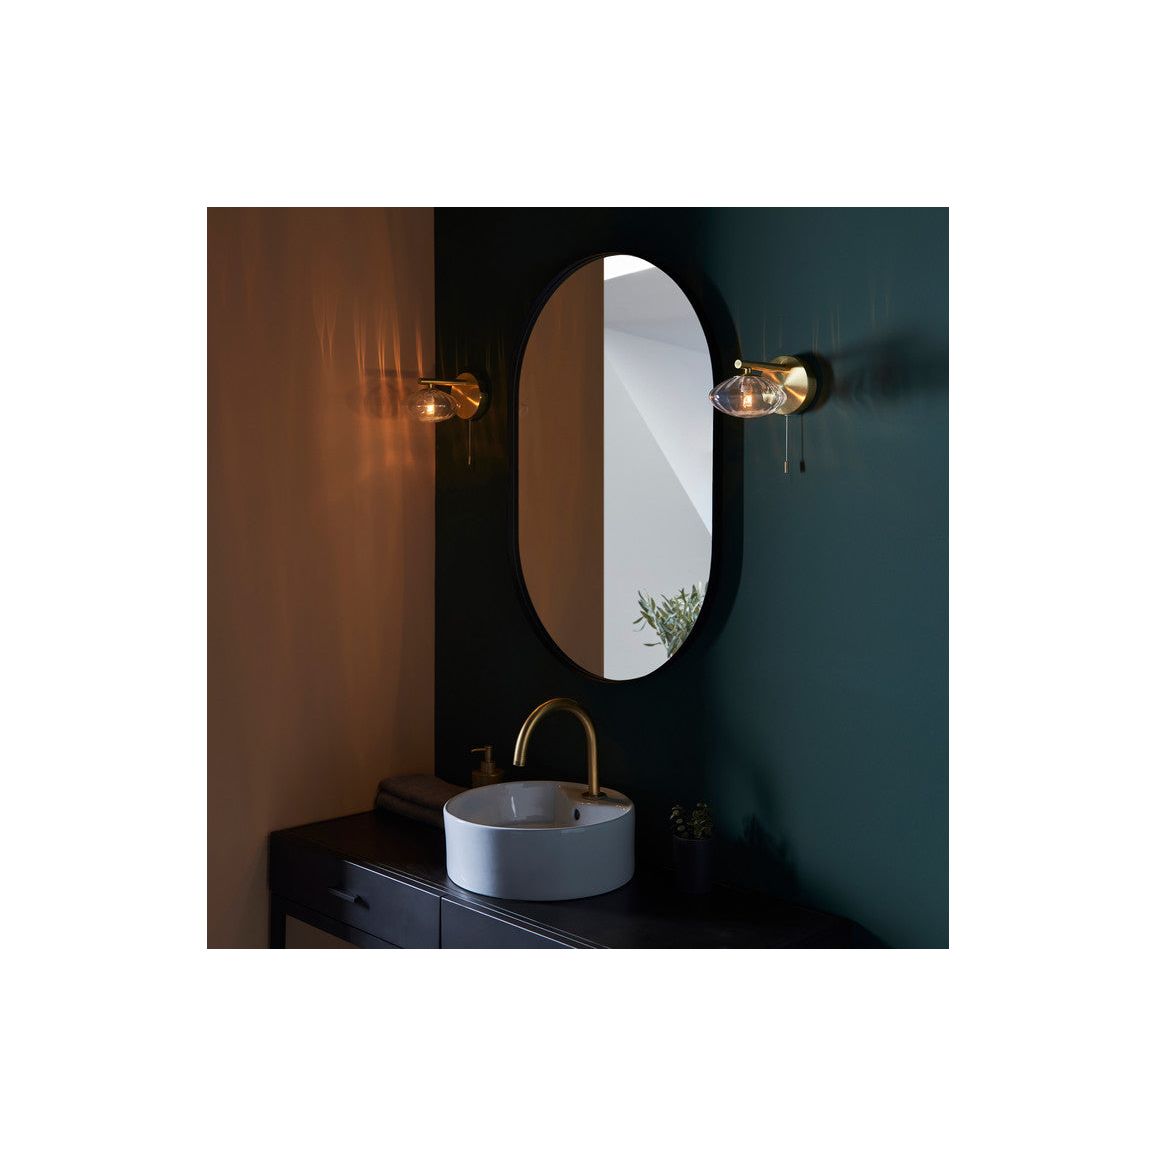 Albion Wall Light - Brushed Brass